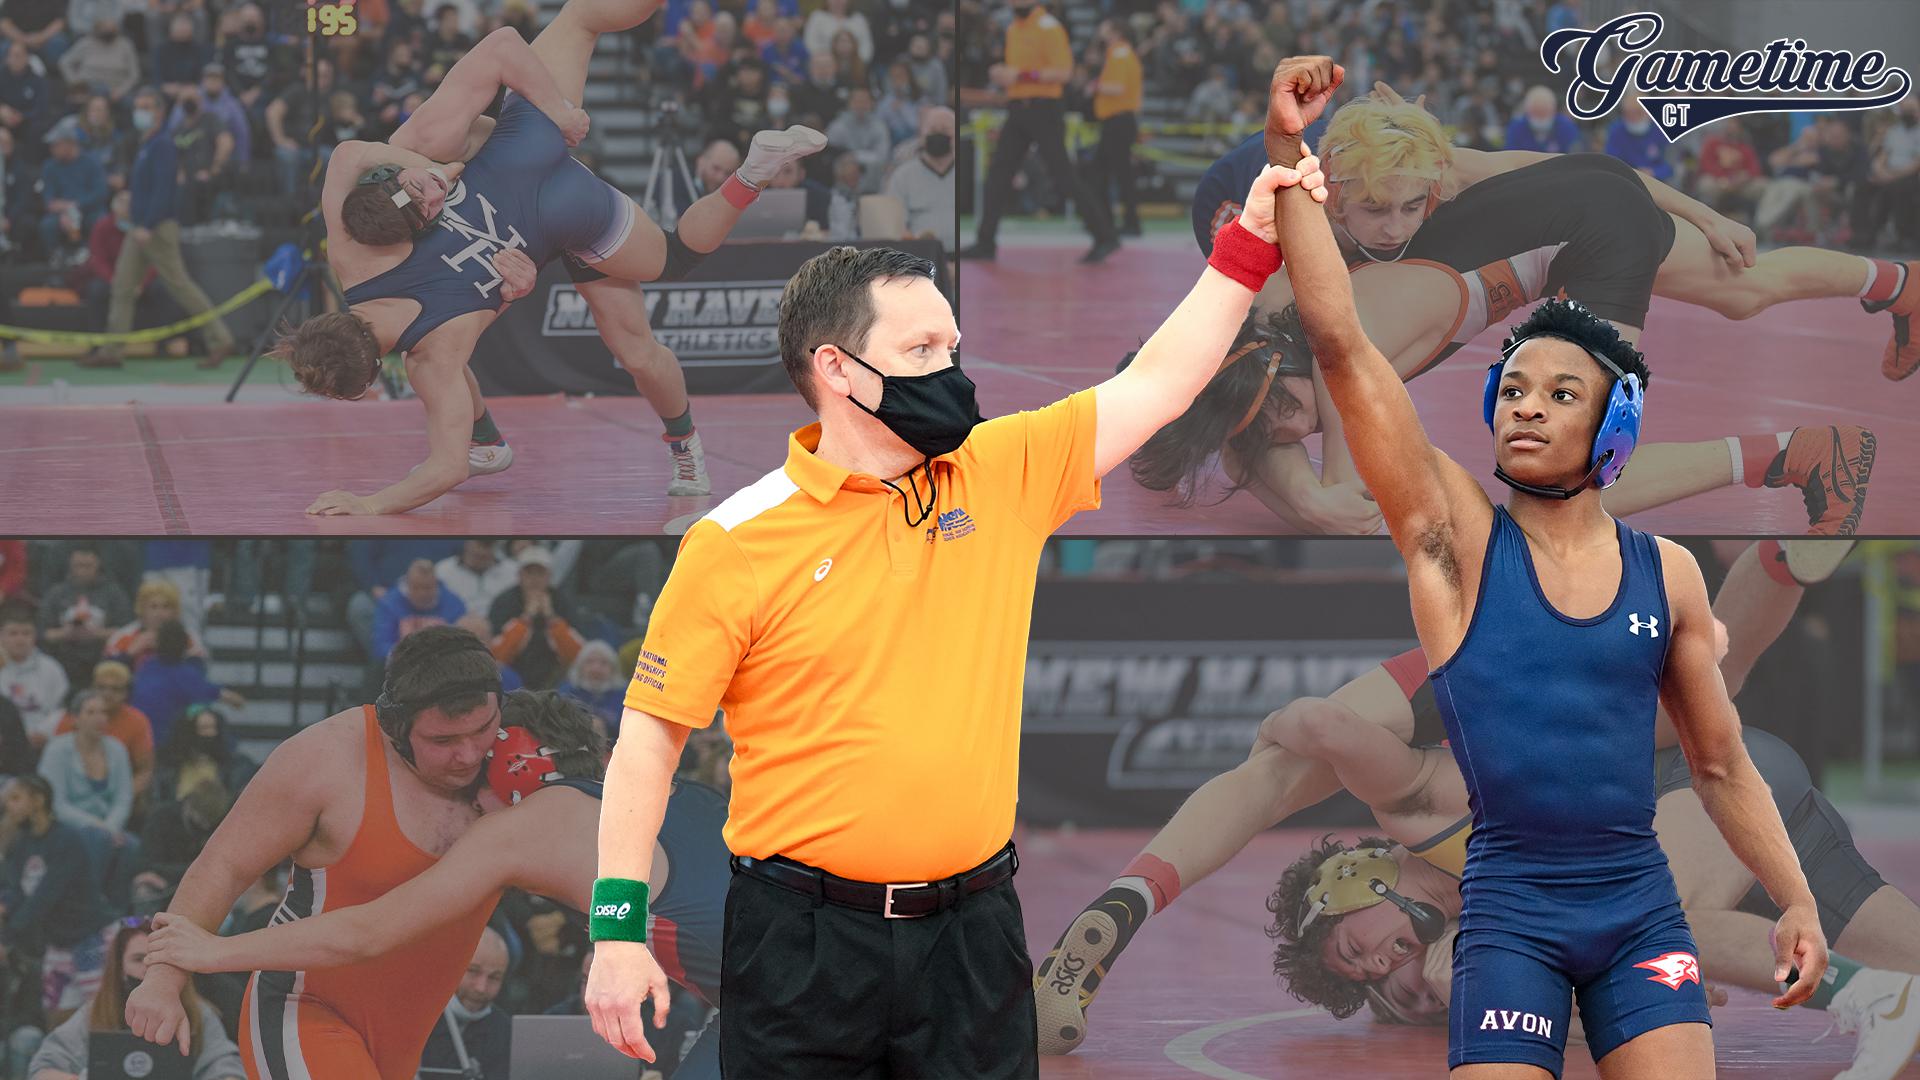 Breaking down the 2022 New England Wrestling Championships